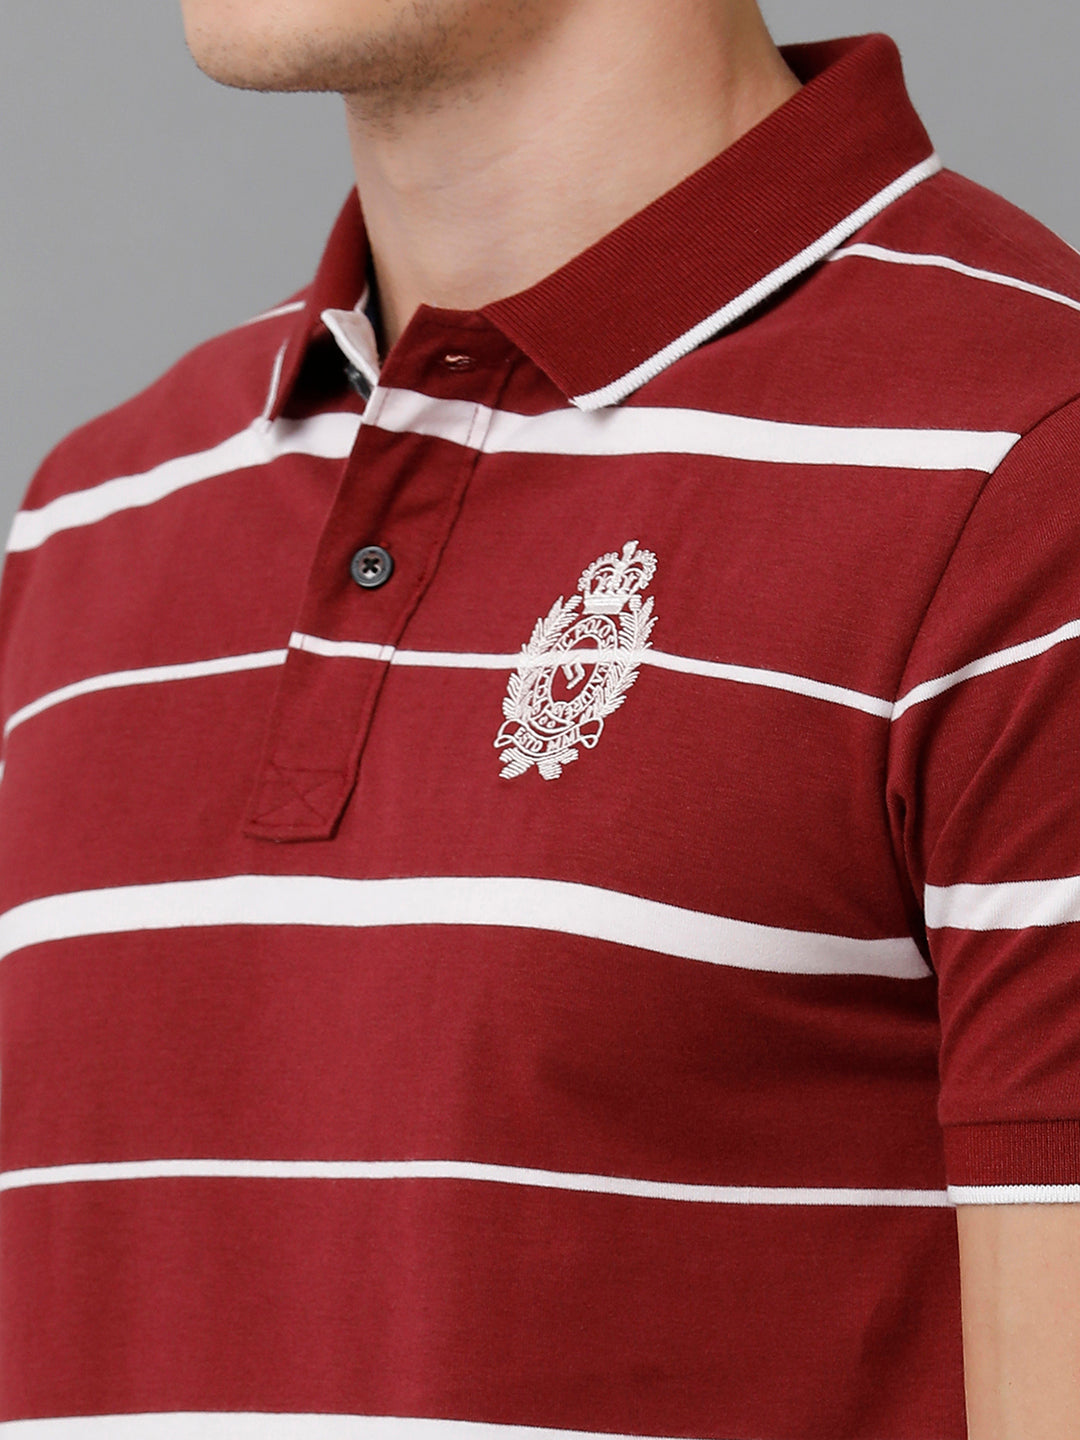 Classic Polo Men's Cotton Striped Half Sleeve Slim Fit Polo Neck Red Color T-Shirt | Cpeg - 296 A